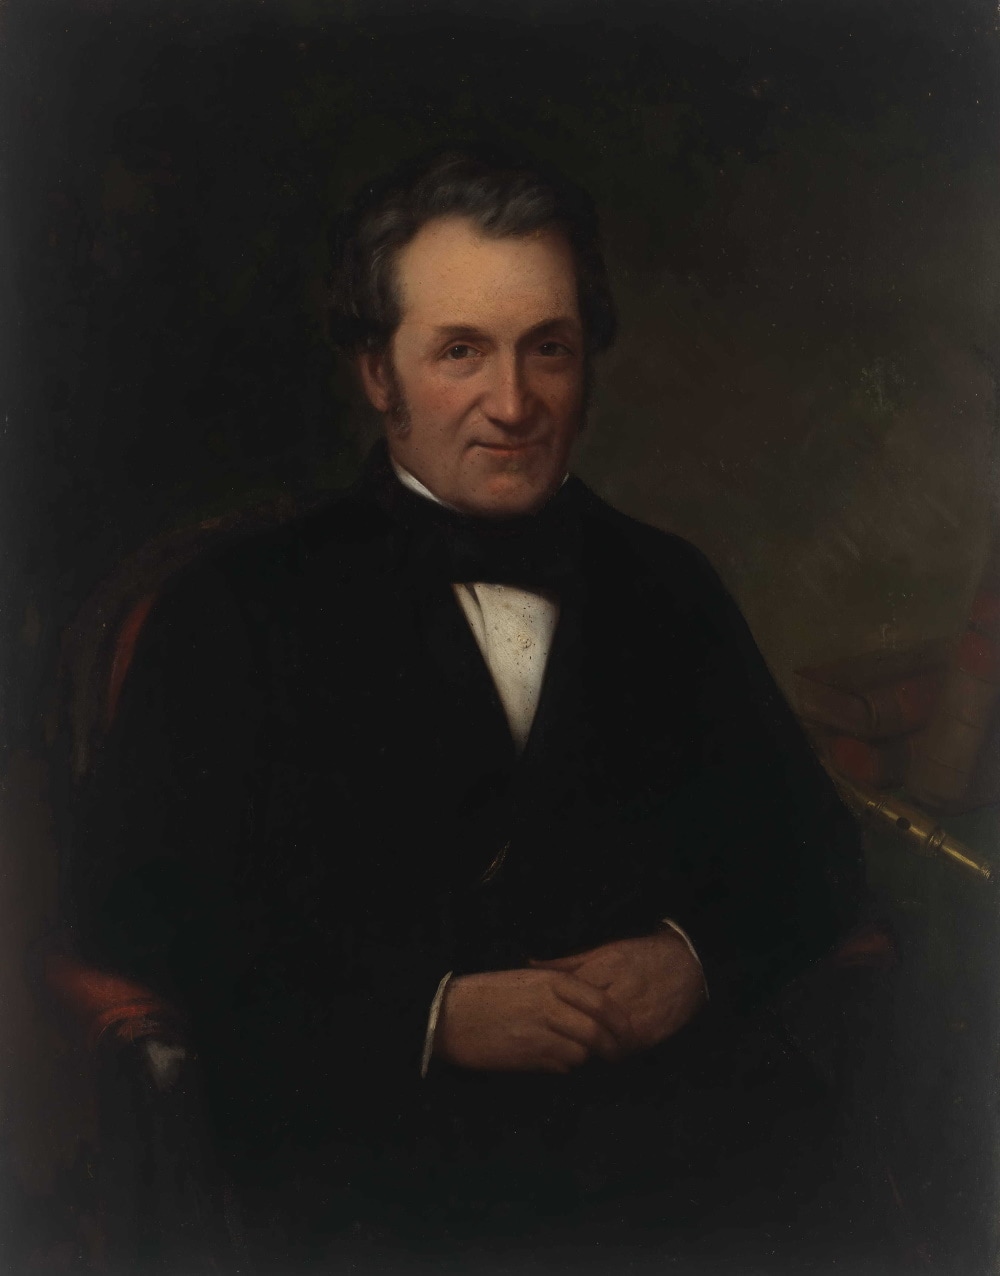 Gilbert Wright, with his golden flute; portrait by James Anderson, 1859; State Library of New South Wales